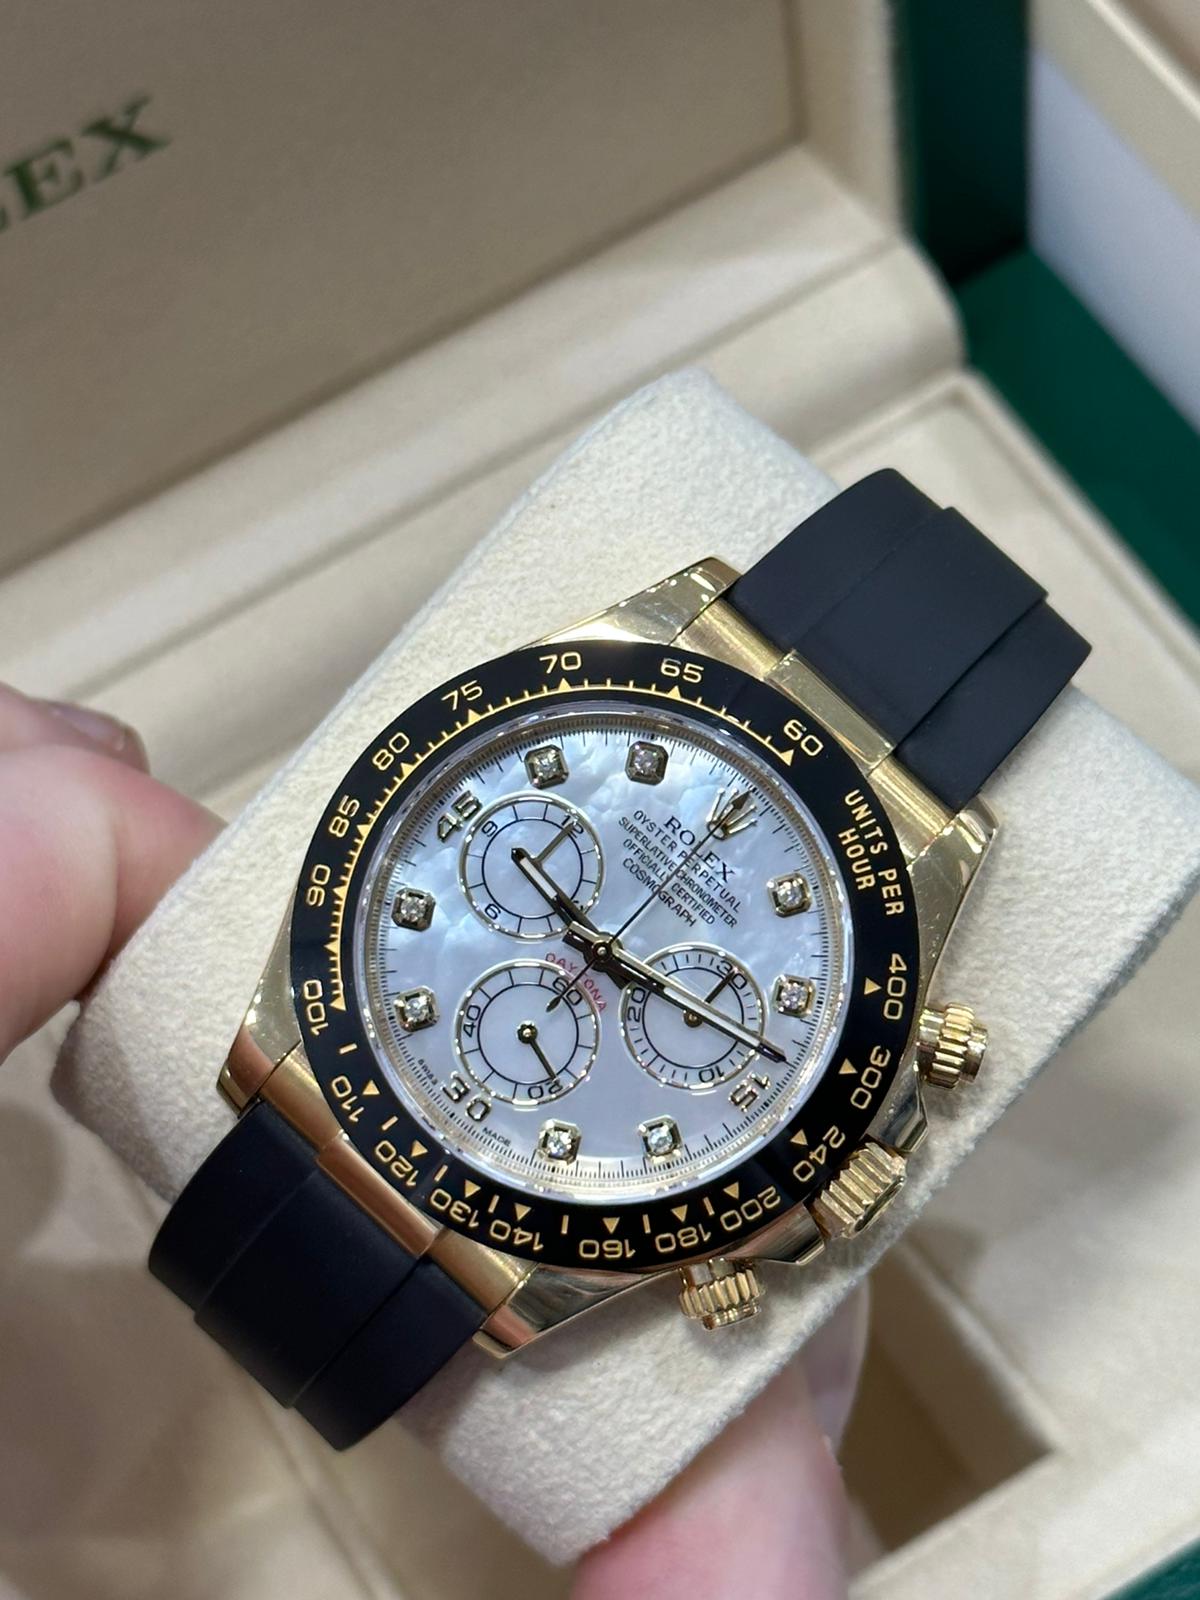 Rolex Daytona Oysterflex Yellow Gold with Rare factory MOP diamond dial complete with box and papers - Image 8 of 8